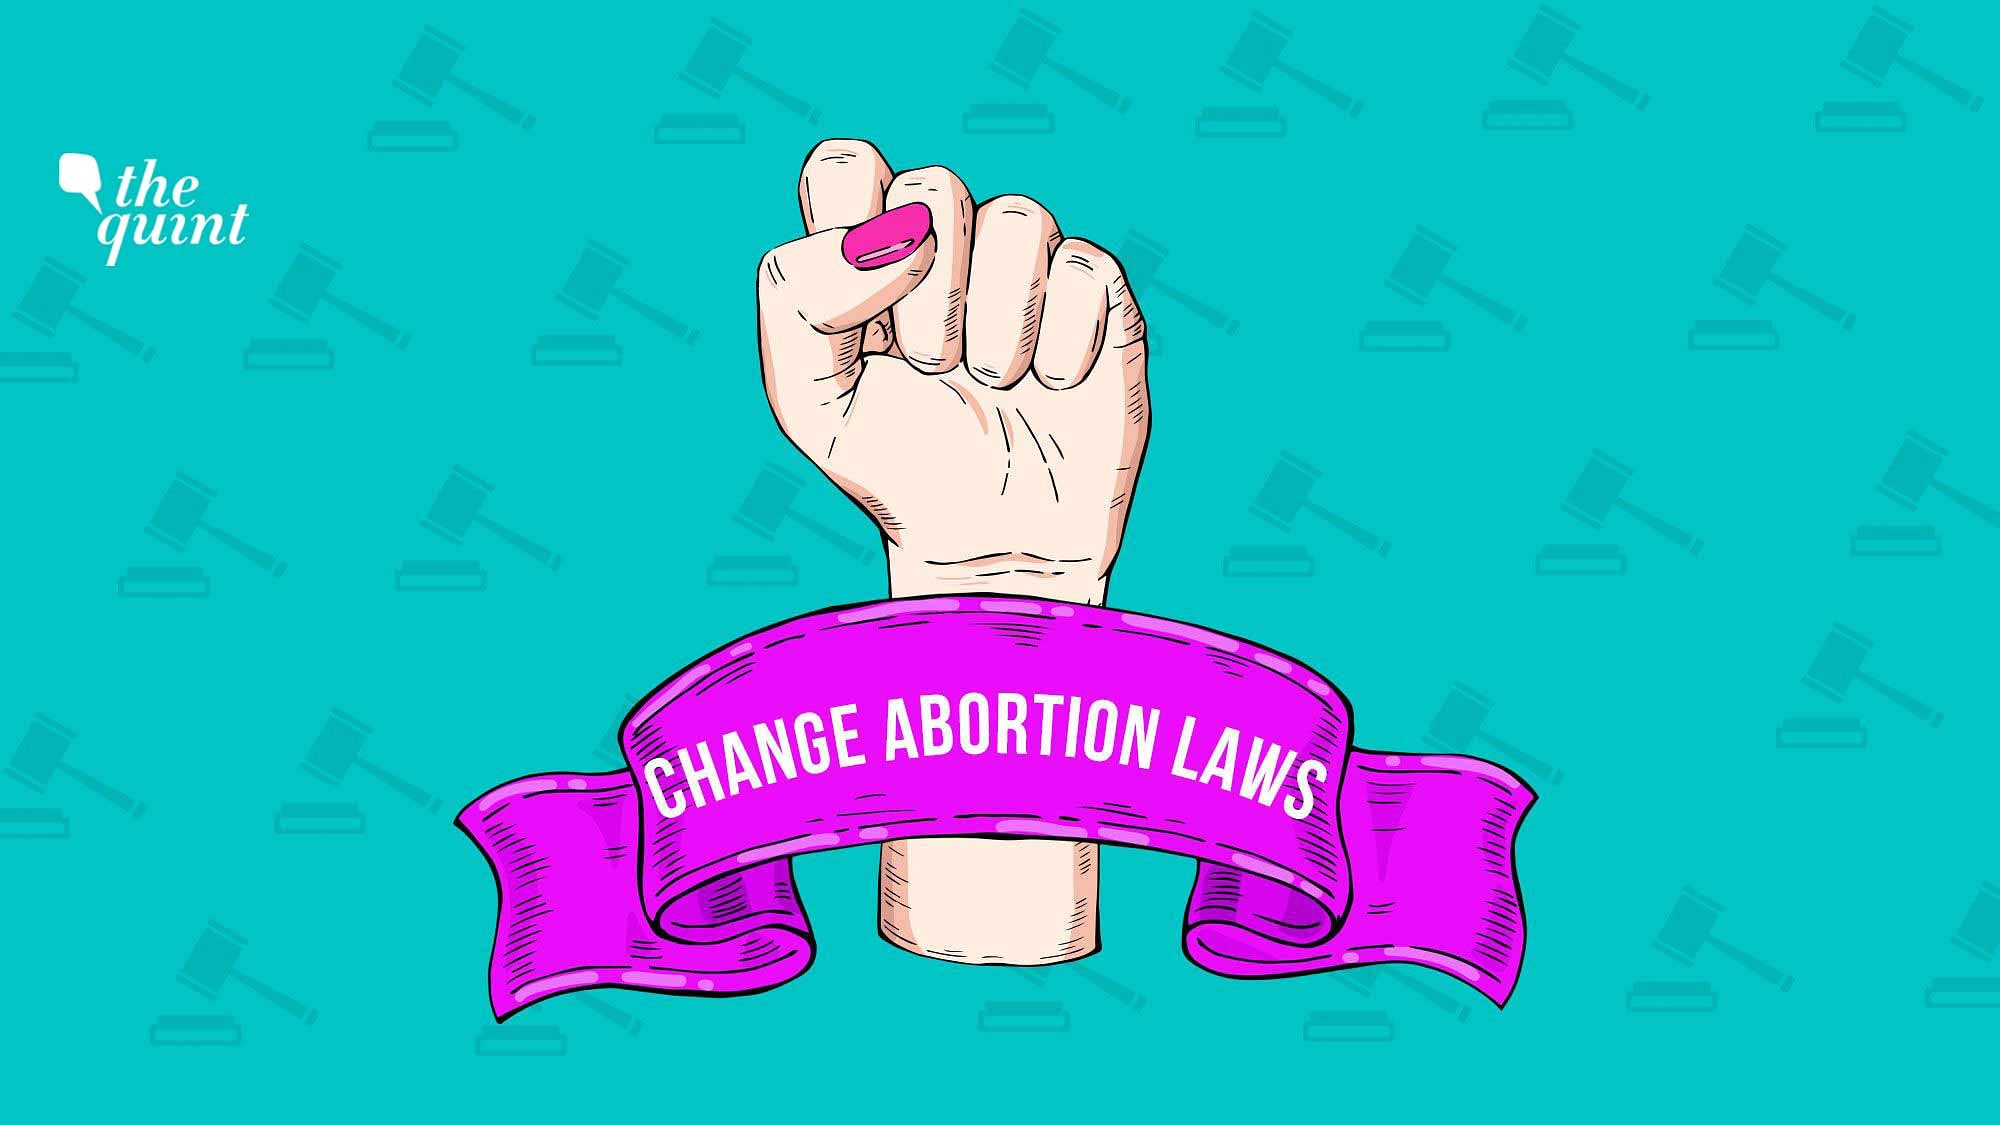 What are the amendments suggested to India’s abortion laws? What are their pros and cons?